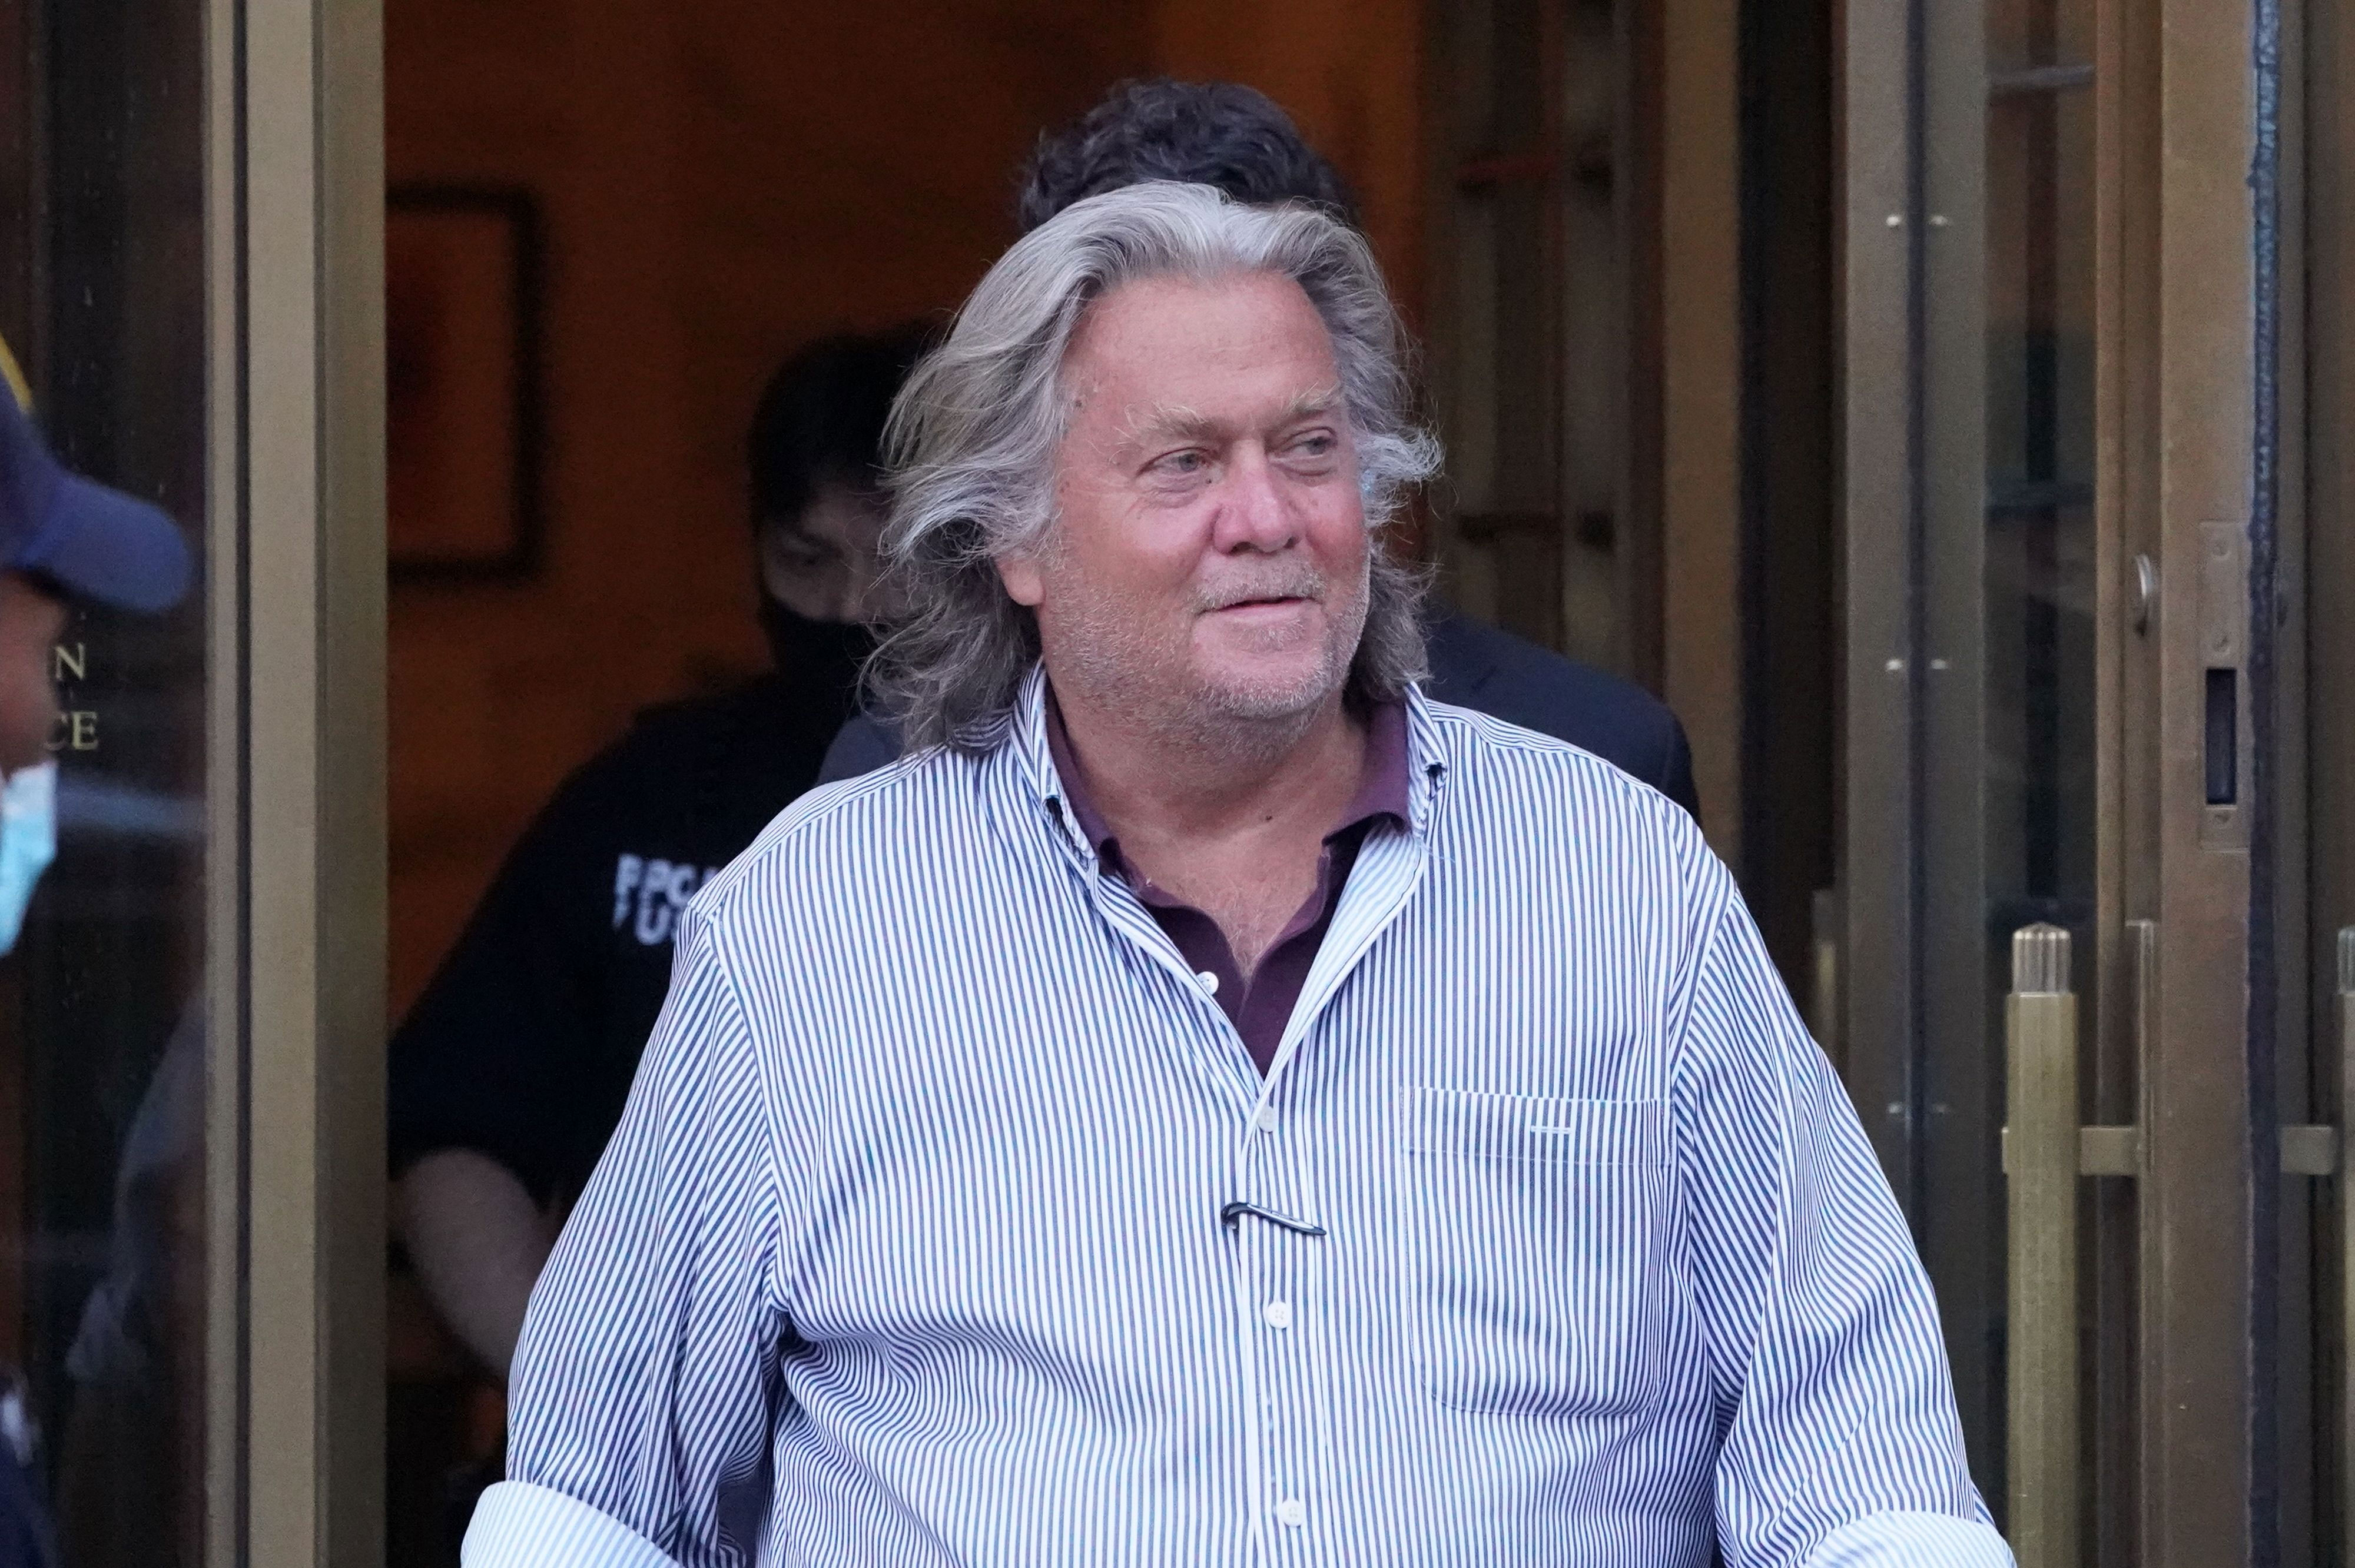 Steve Bannon is pictured in New York on August 20, 2020.